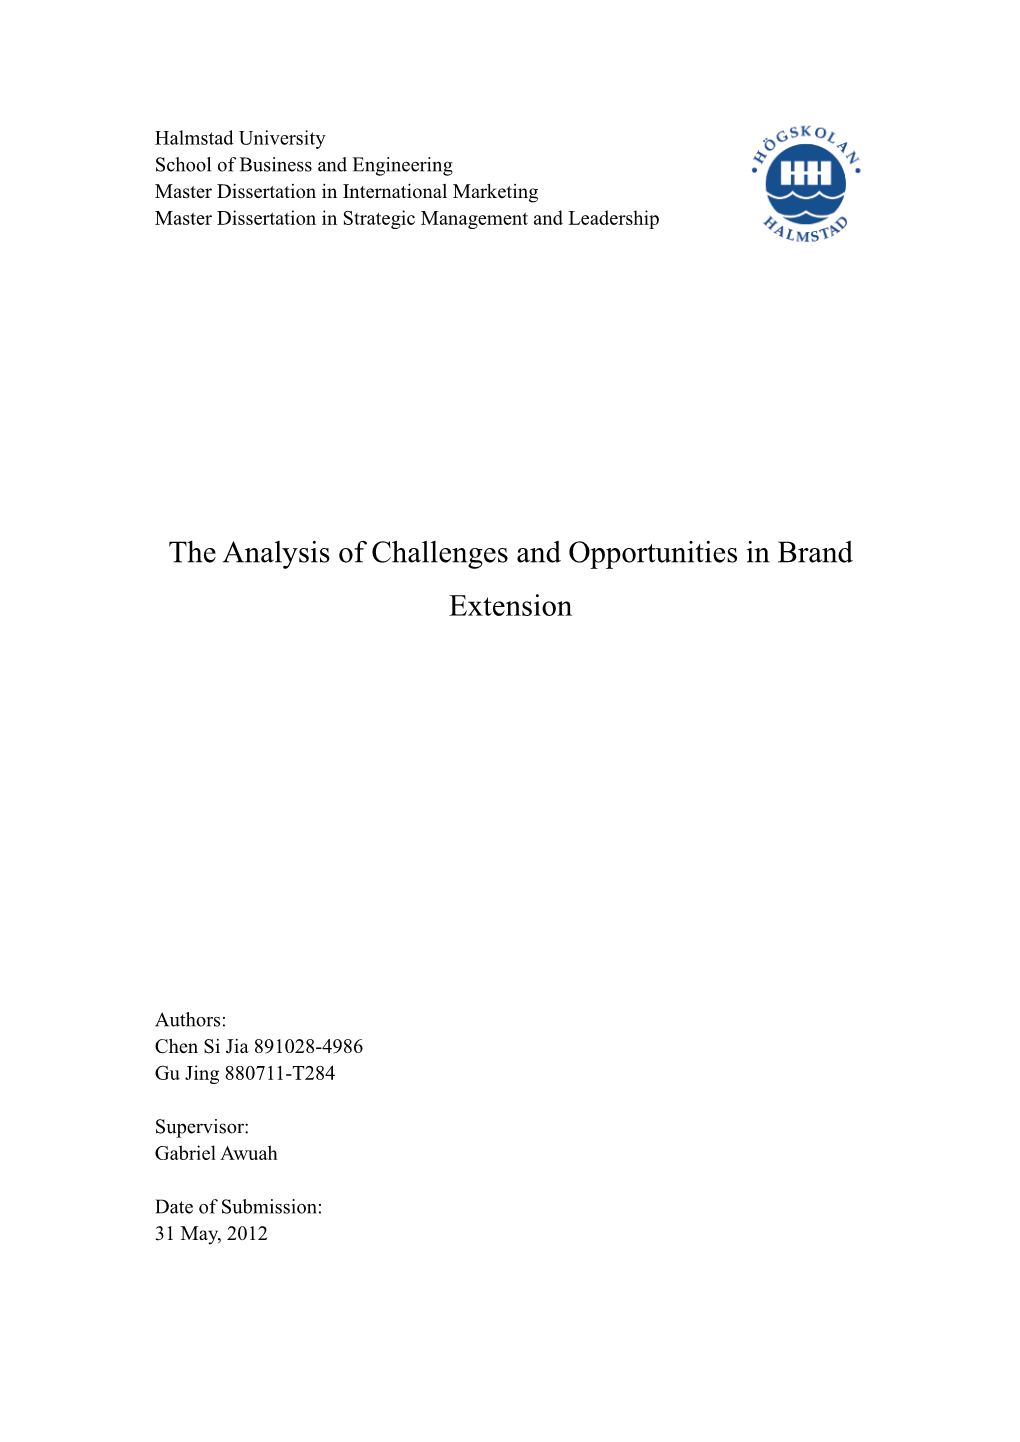 The Analysis of Challenges and Opportunities in Brand Extension